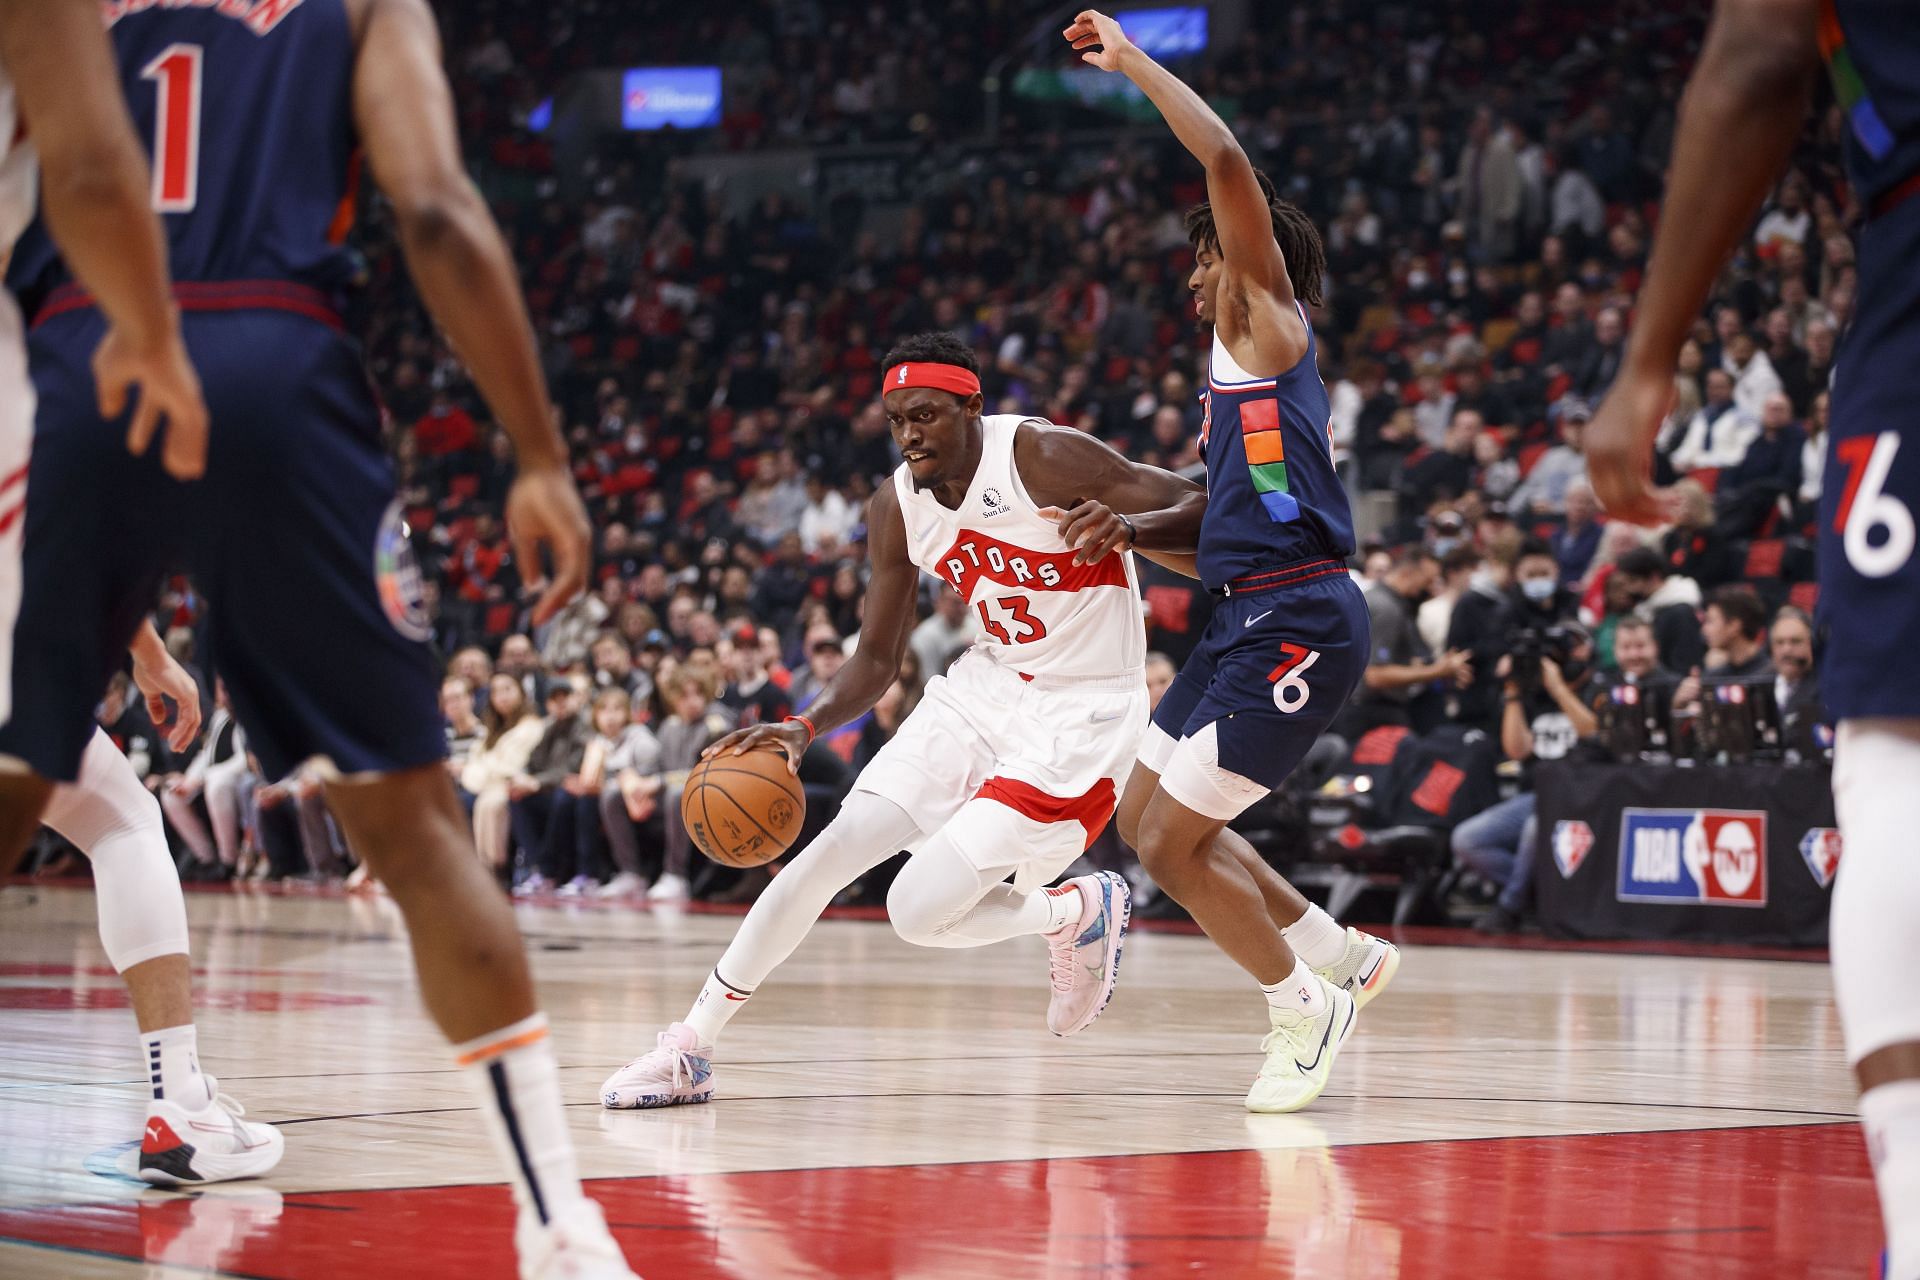 Pascal Siakam No. 43 of the Toronto Raptors dribbles against Tyrese Maxey No. 0 of the Philadelphia 76ers.